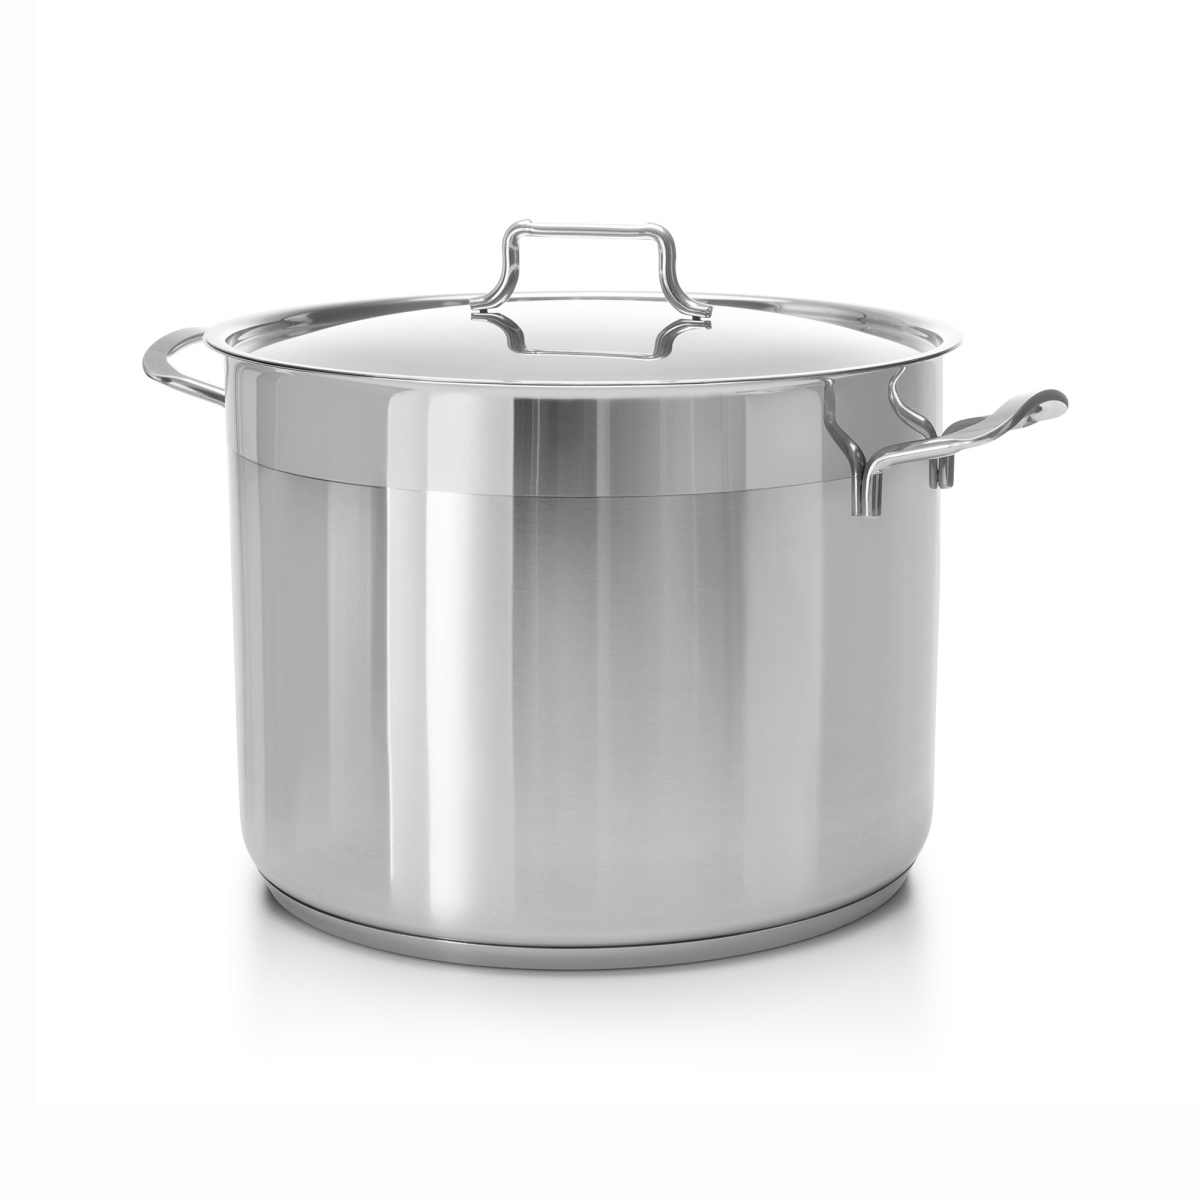 H11 11 Qt. Classic 18 By 10 Stainless Steel Stockpot Covered In Cookware Induction